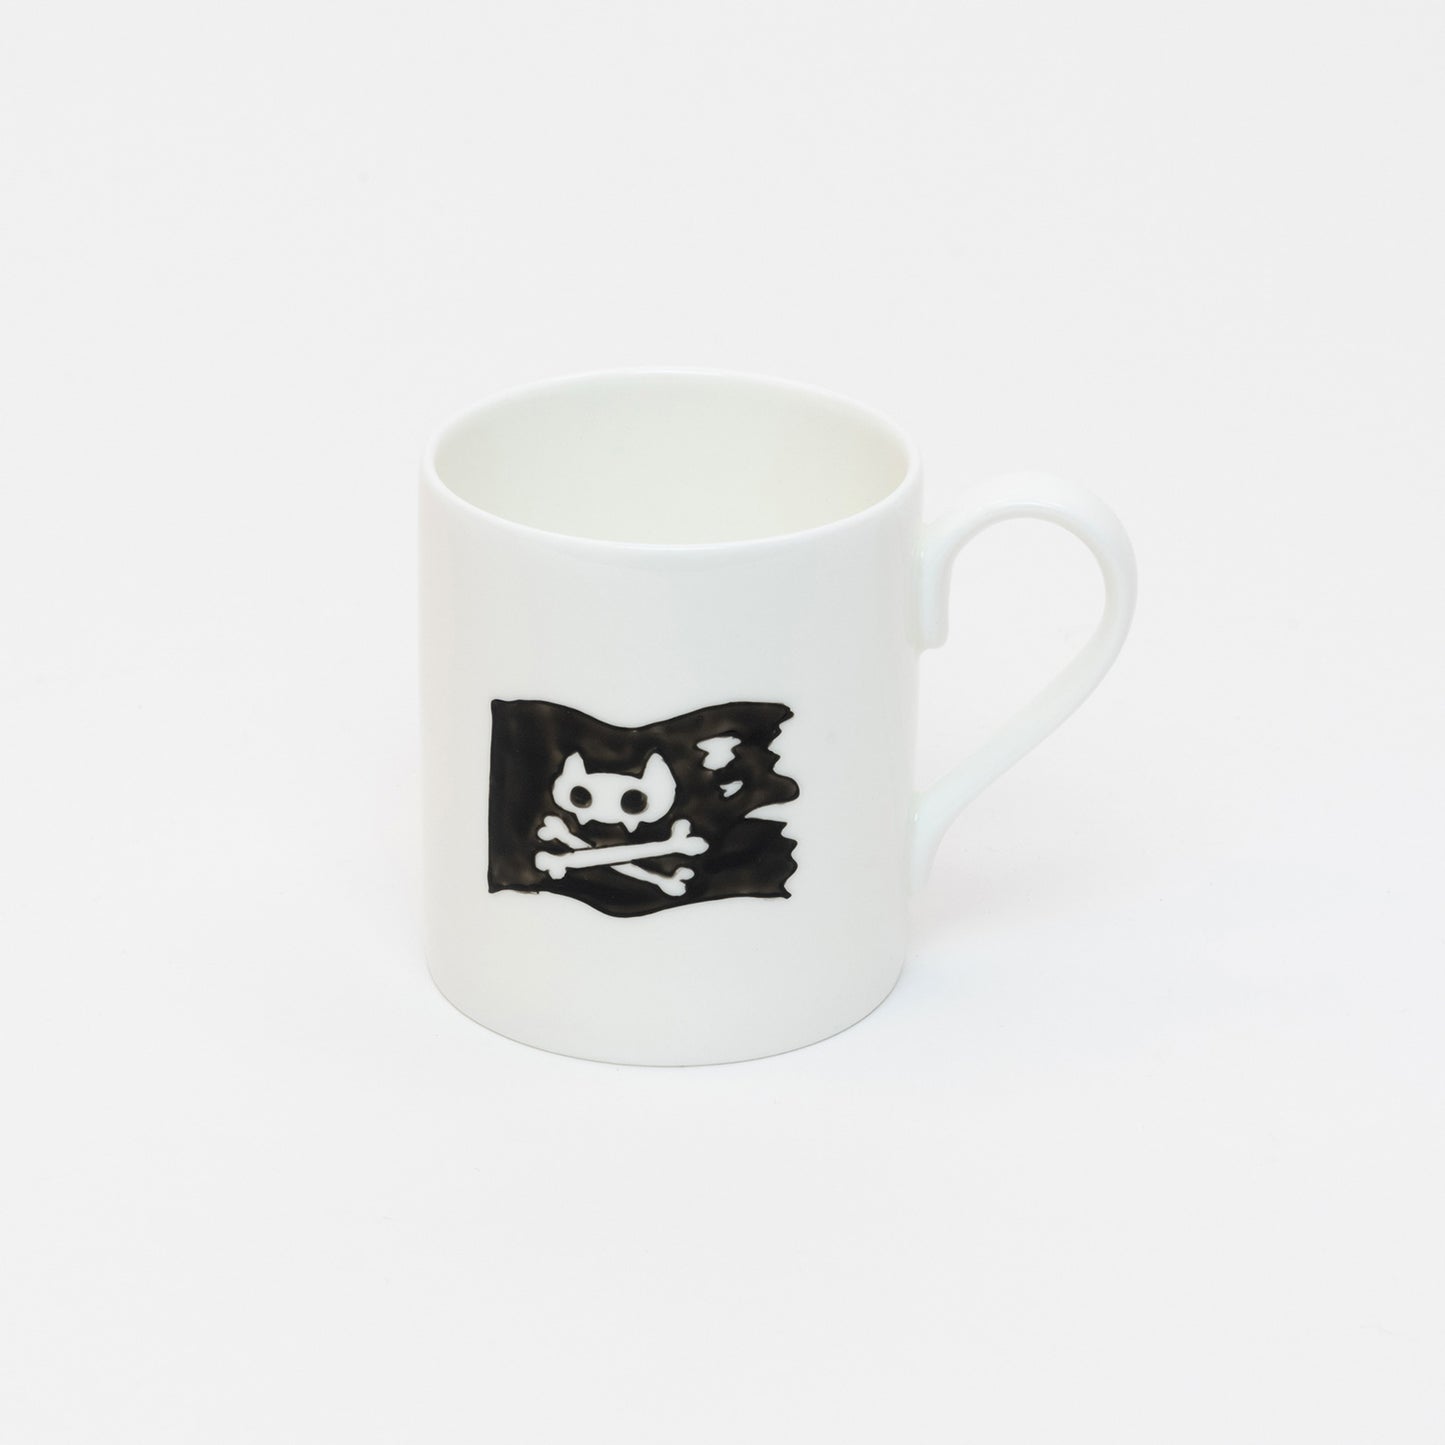 Back of the pirate mug with a black cat skull and crossbones flag.